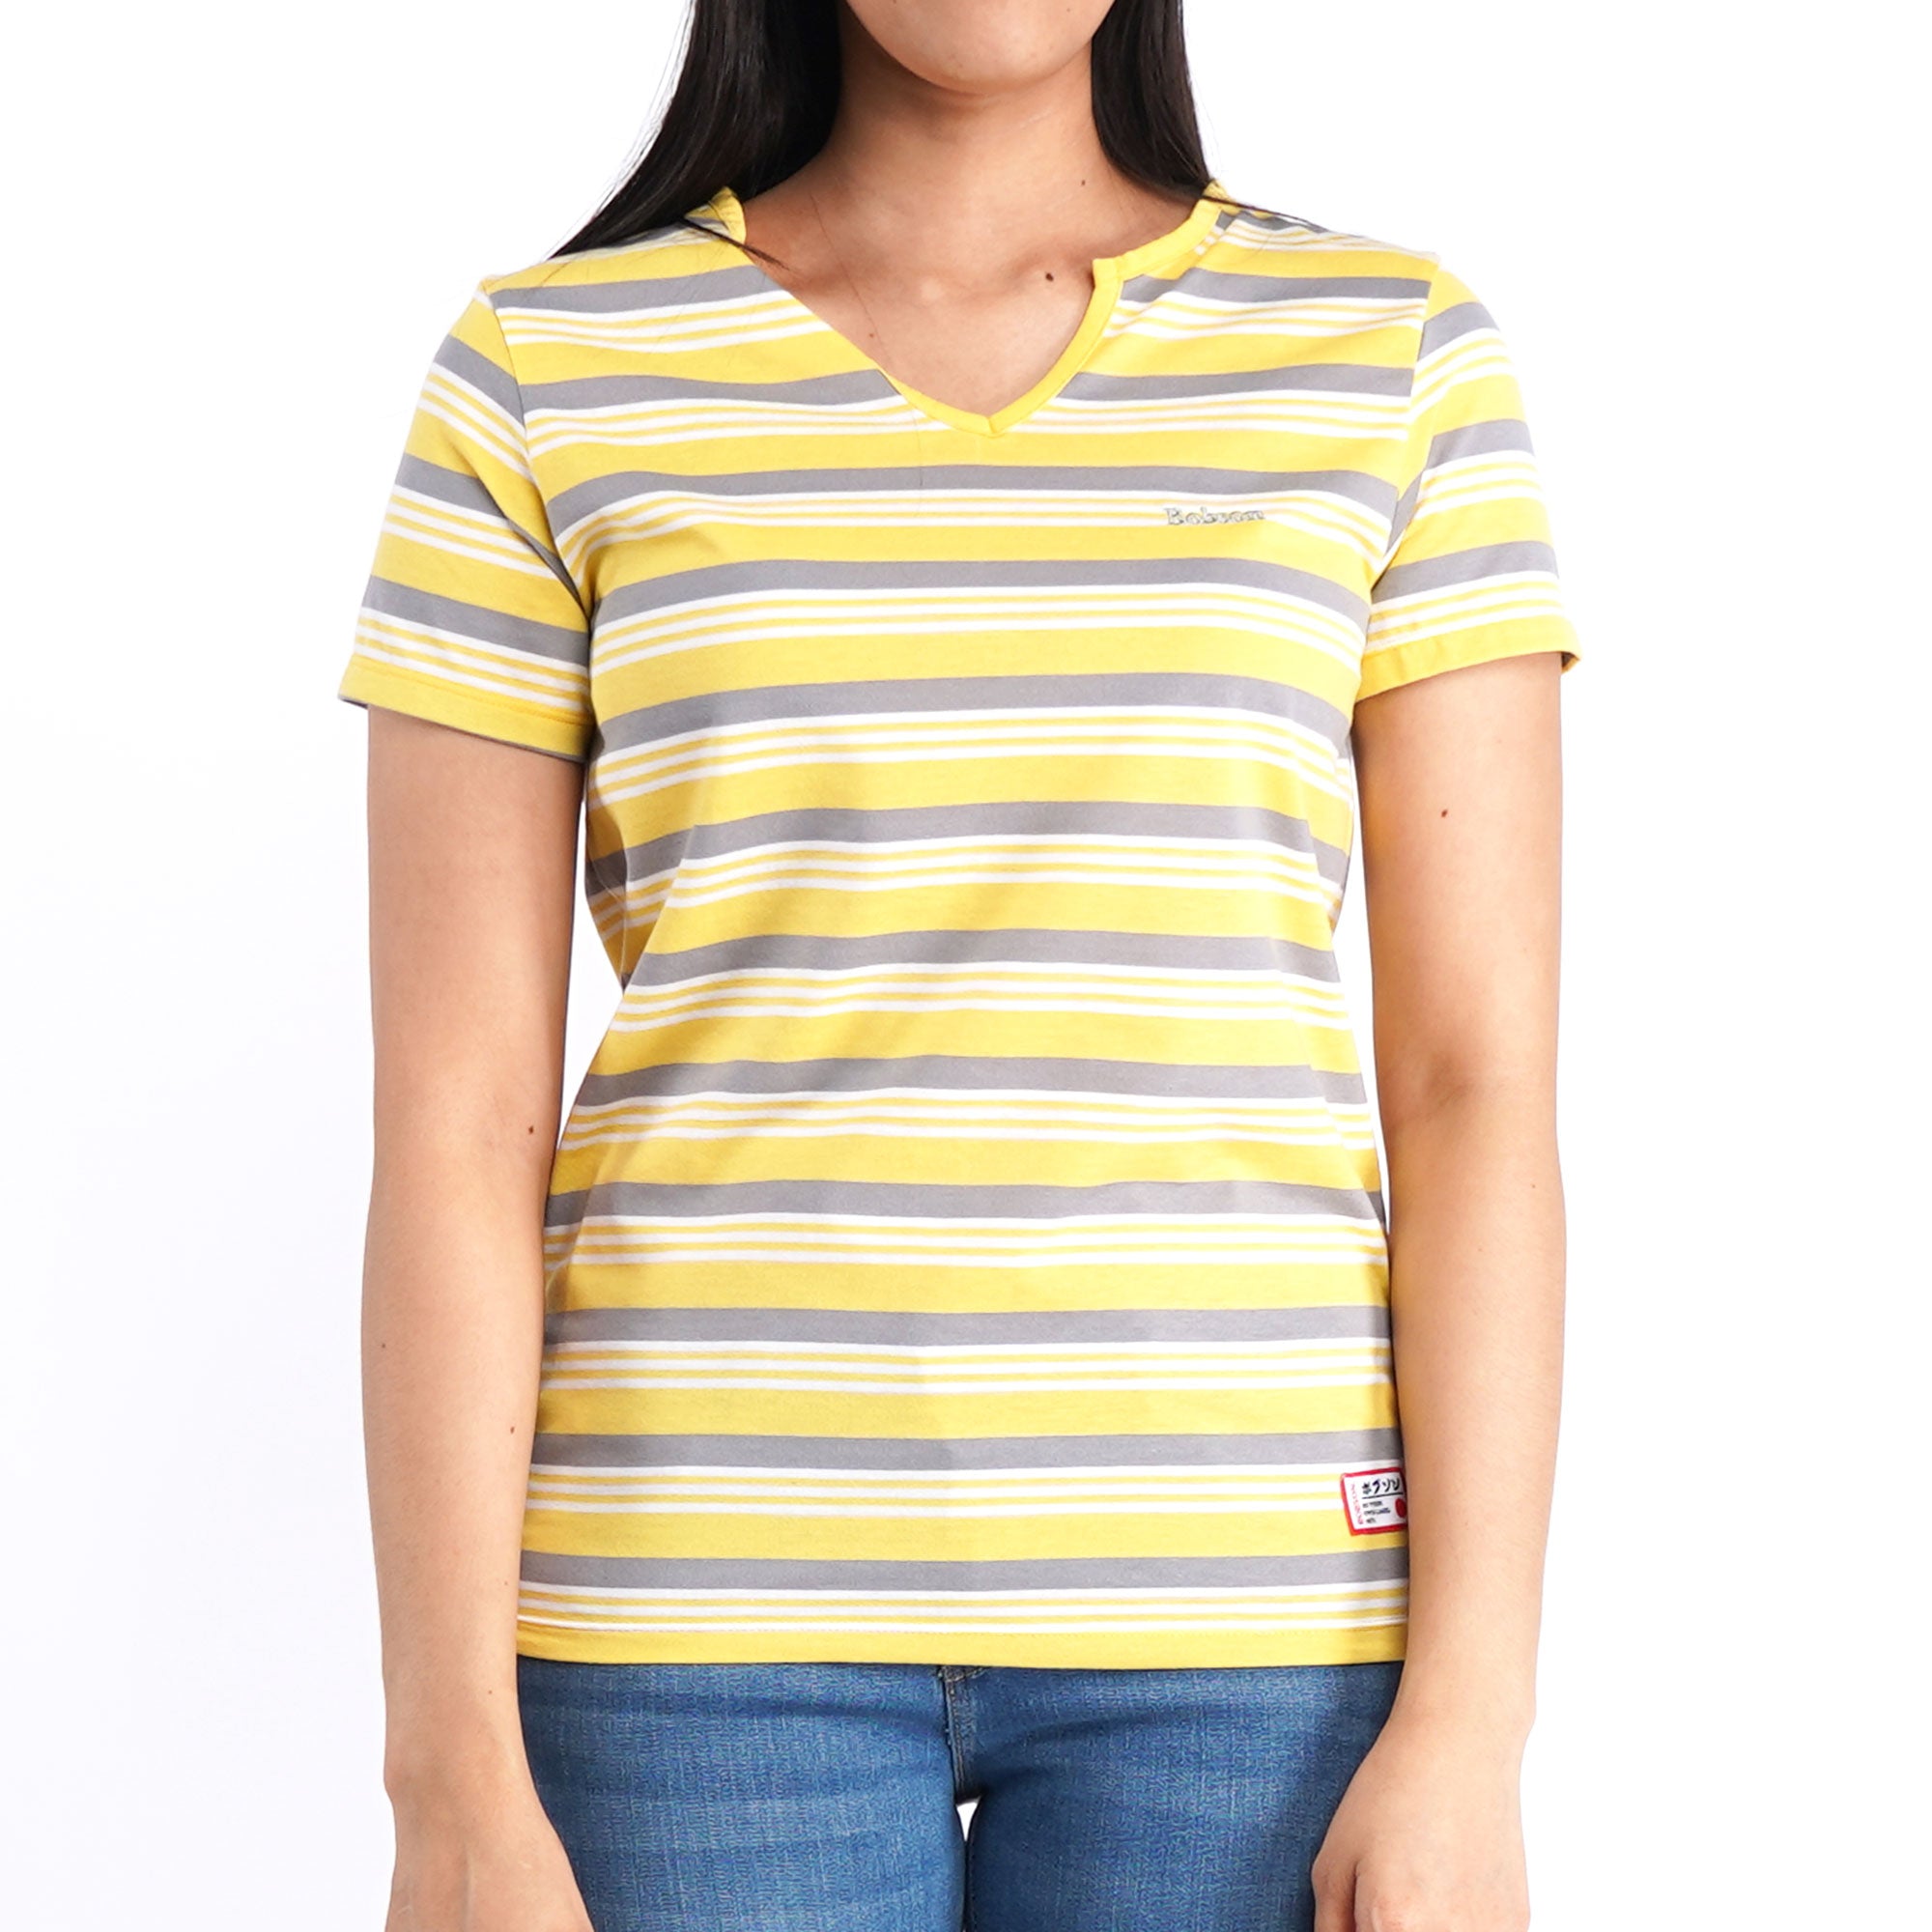 Bobson Japanese Ladies Basic Striped shirt for Women Trendy Fashion High Quality Apparel Comfortable Casual Tees for Women Relaxed Fit 123377 (Yellow)